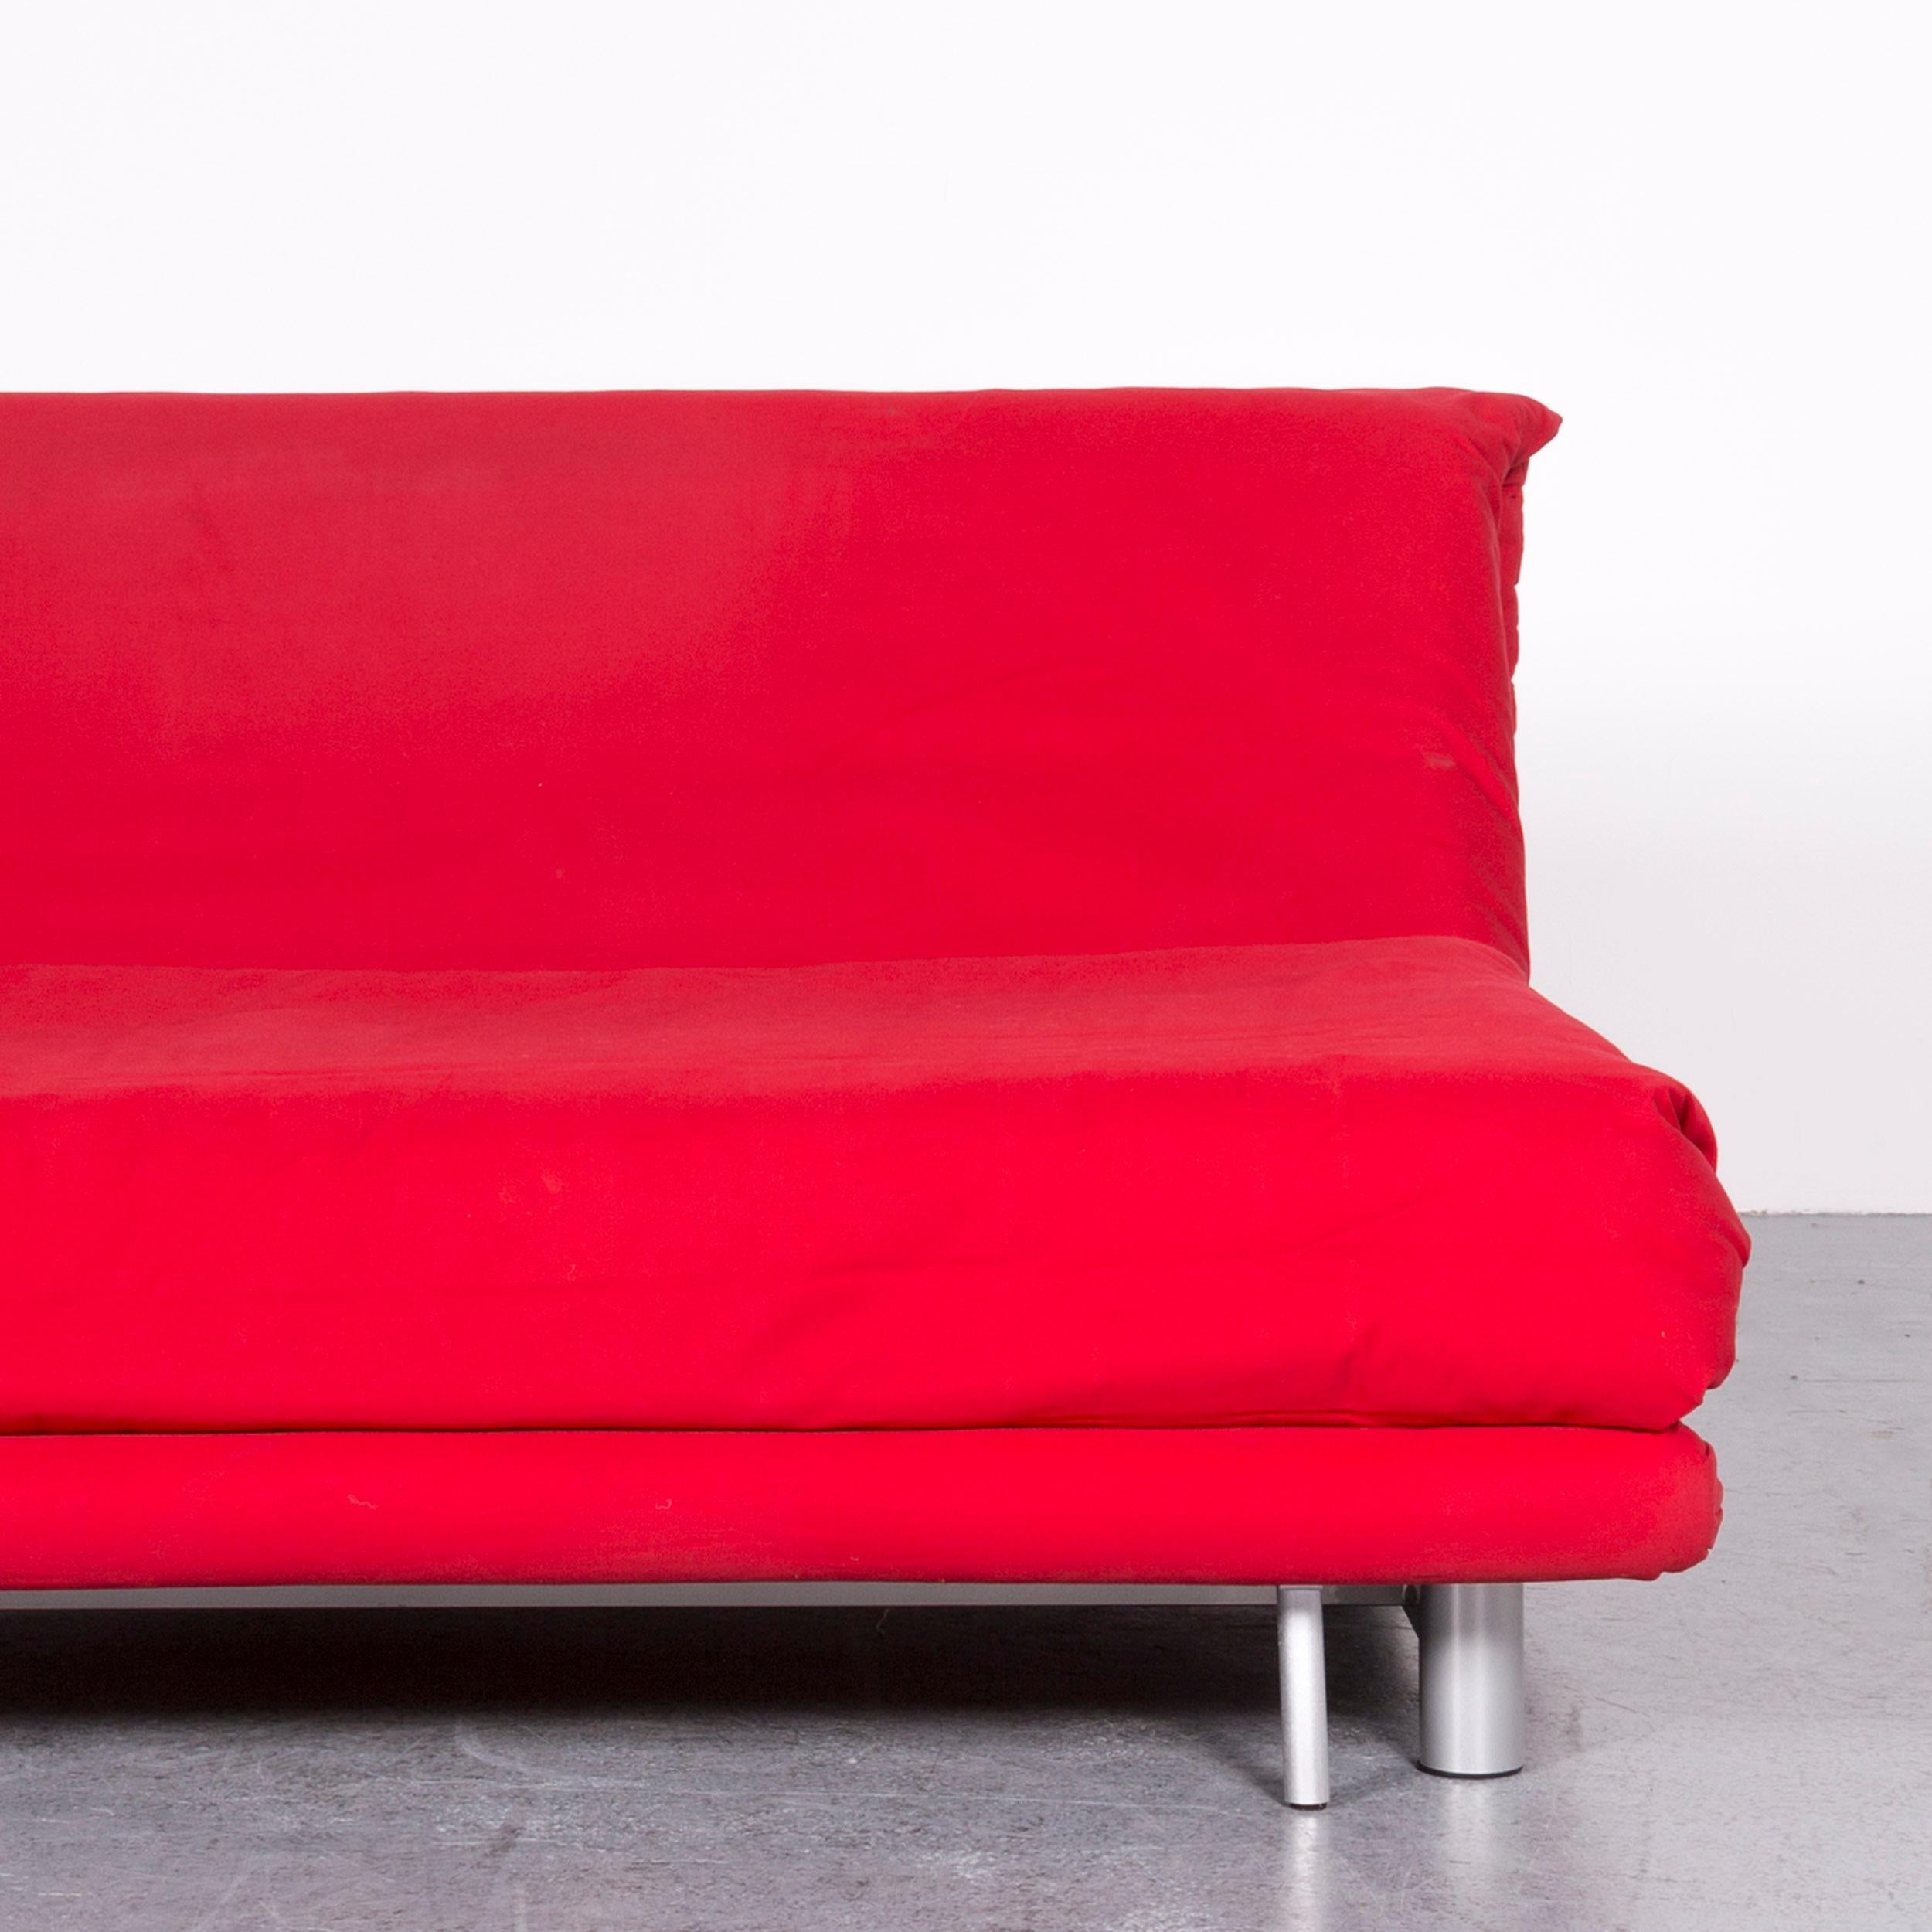 Ligne Roset Multy Fabric Sofa Bed Red Two-Seat Couch Sleep Function For Sale 1